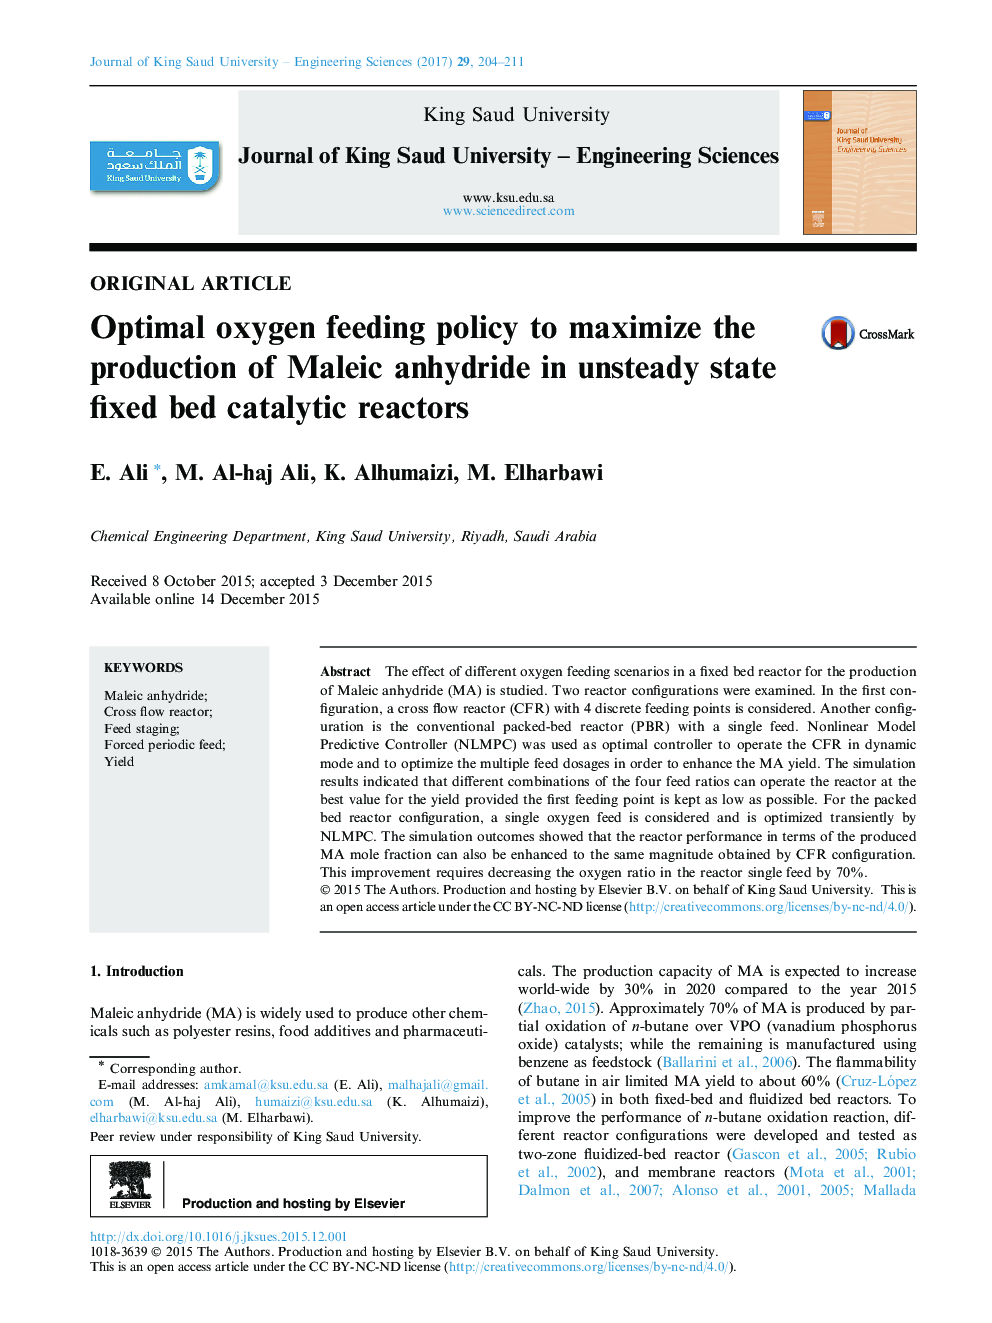 Optimal oxygen feeding policy to maximize the production of Maleic anhydride in unsteady state fixed bed catalytic reactors